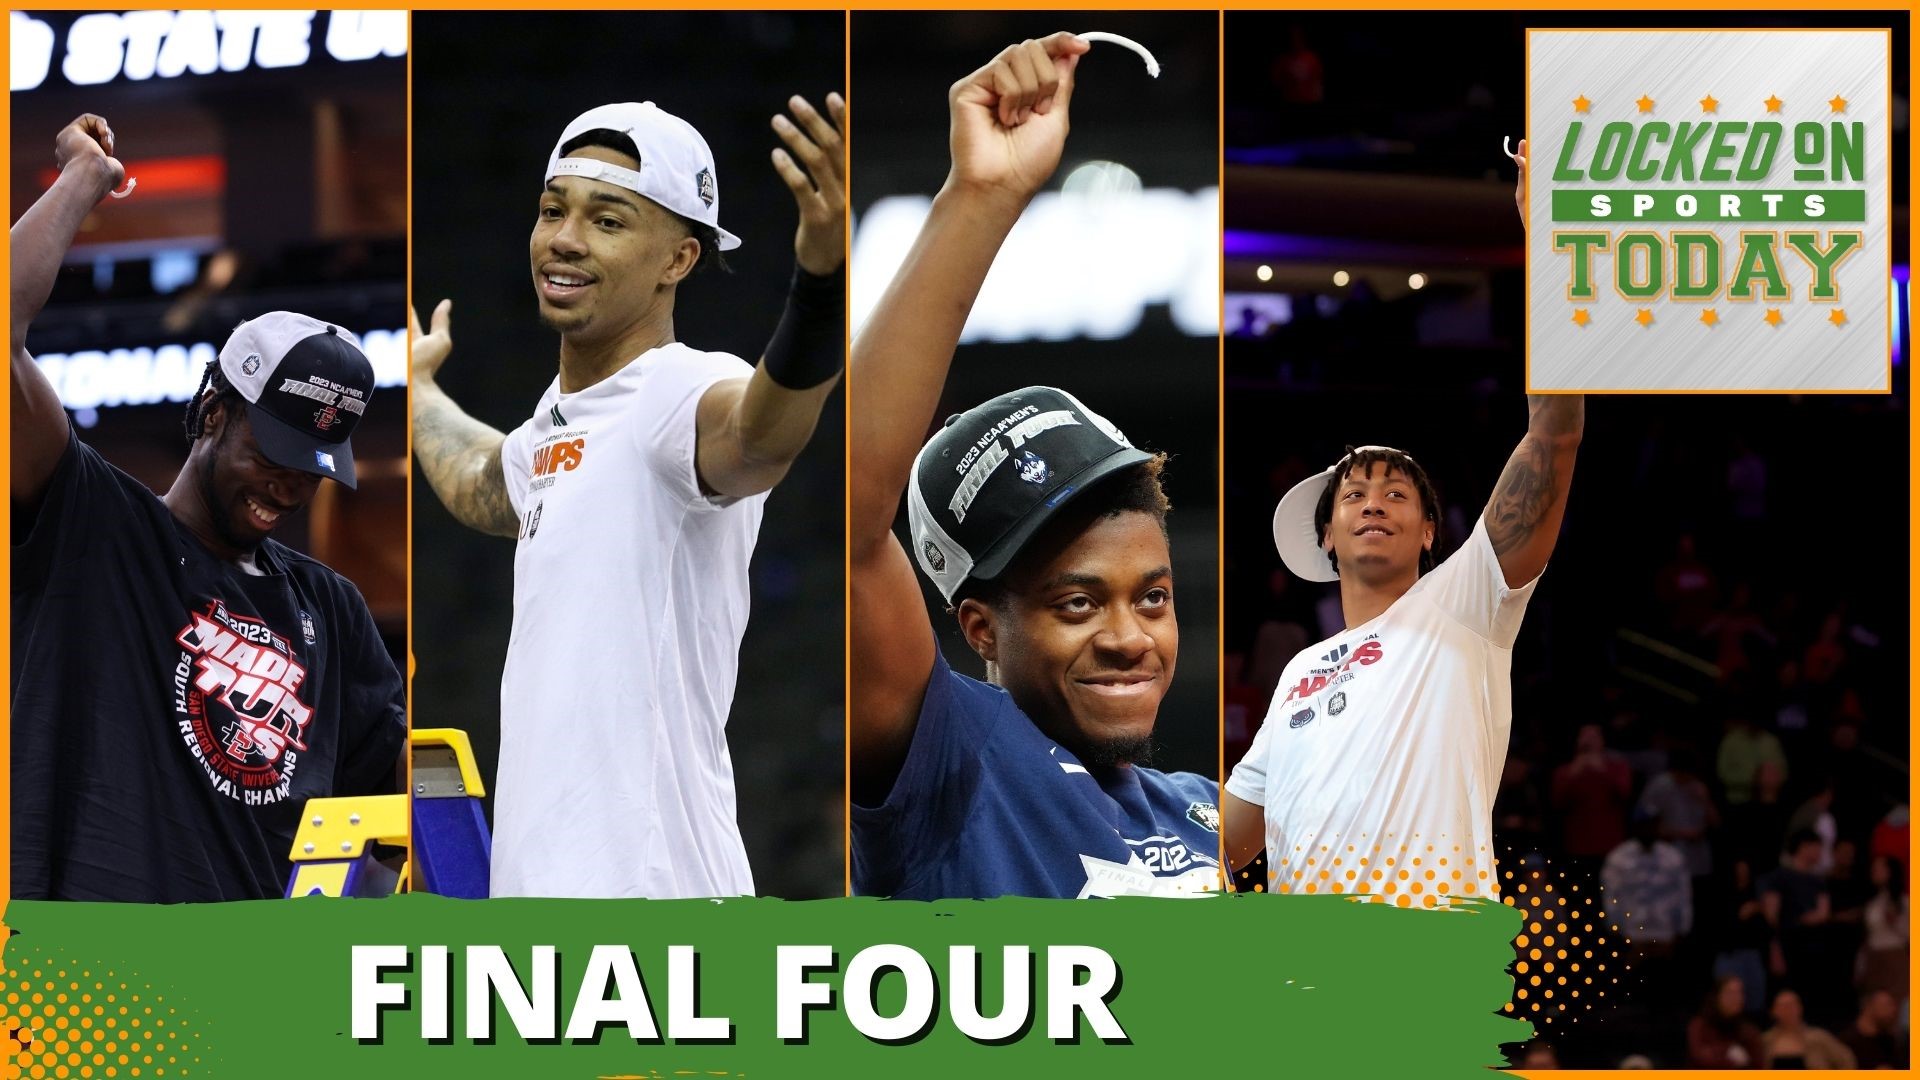 NBA In-Season Tournament final four: Where to watch, what to watch for